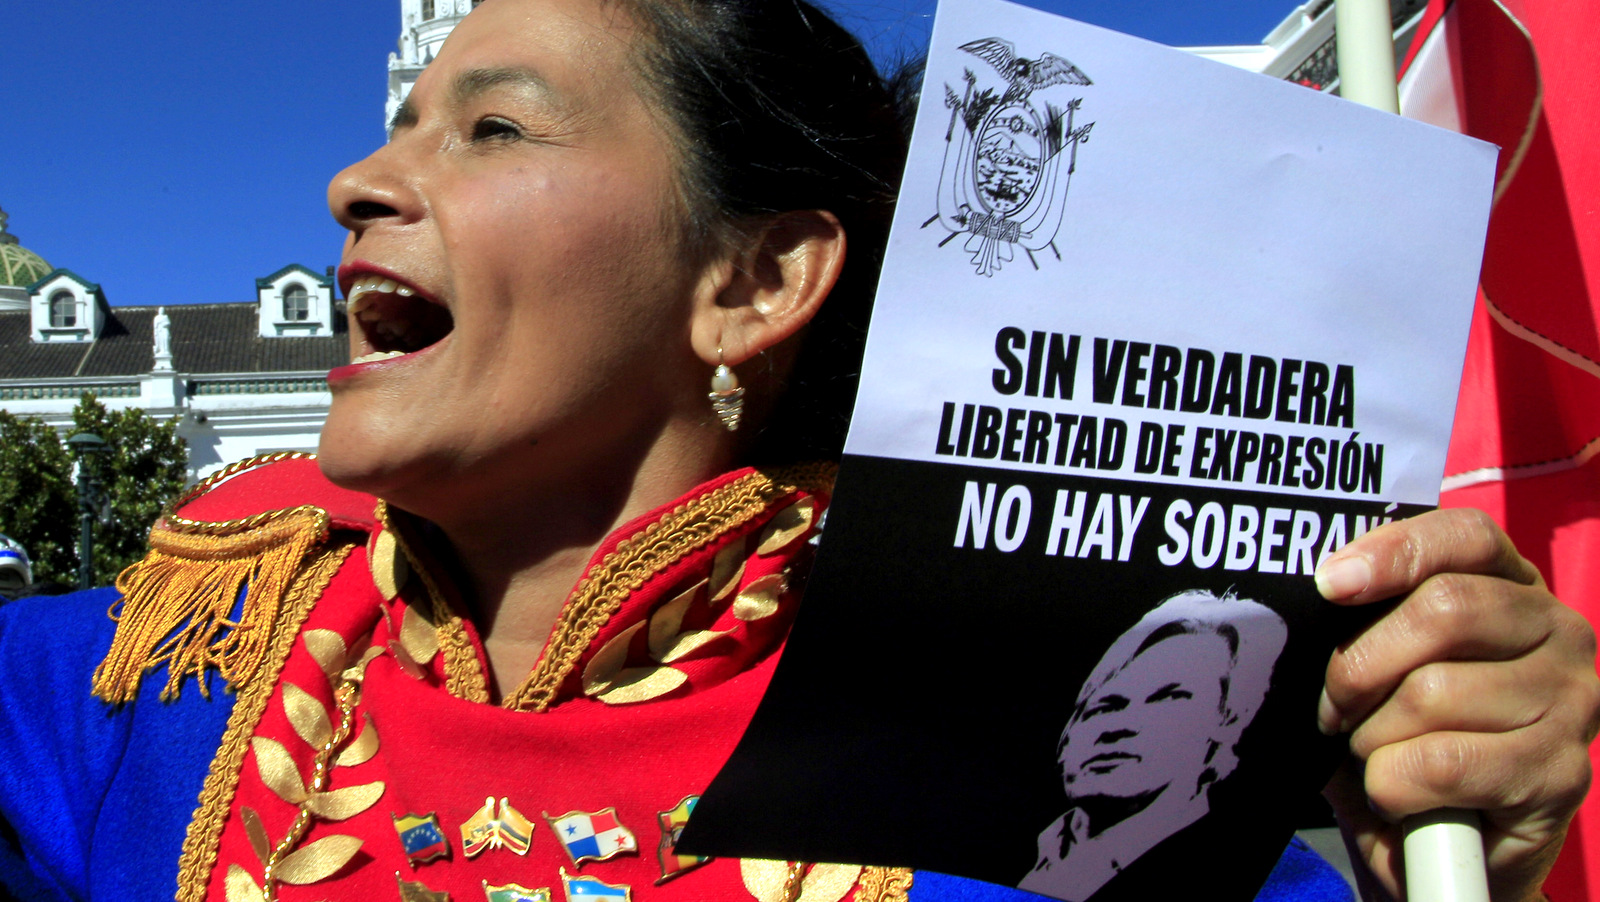 A demonstrator holds a poster with the portrait of WikiLeaks founder Julian Assange during a rally in front of the government palace in Quito, Ecuador, Monday, Aug. 20, 2012. People gathered at the square in front of the government palace to support president Correa after he granted political asylum to Assange and against the British government threats to enter Ecuador's embassy in London where Assange is confined. Legend on the poster says, "Without true freedom of expression there is no sovereignty". (AP Photo/Dolores Ochoa)